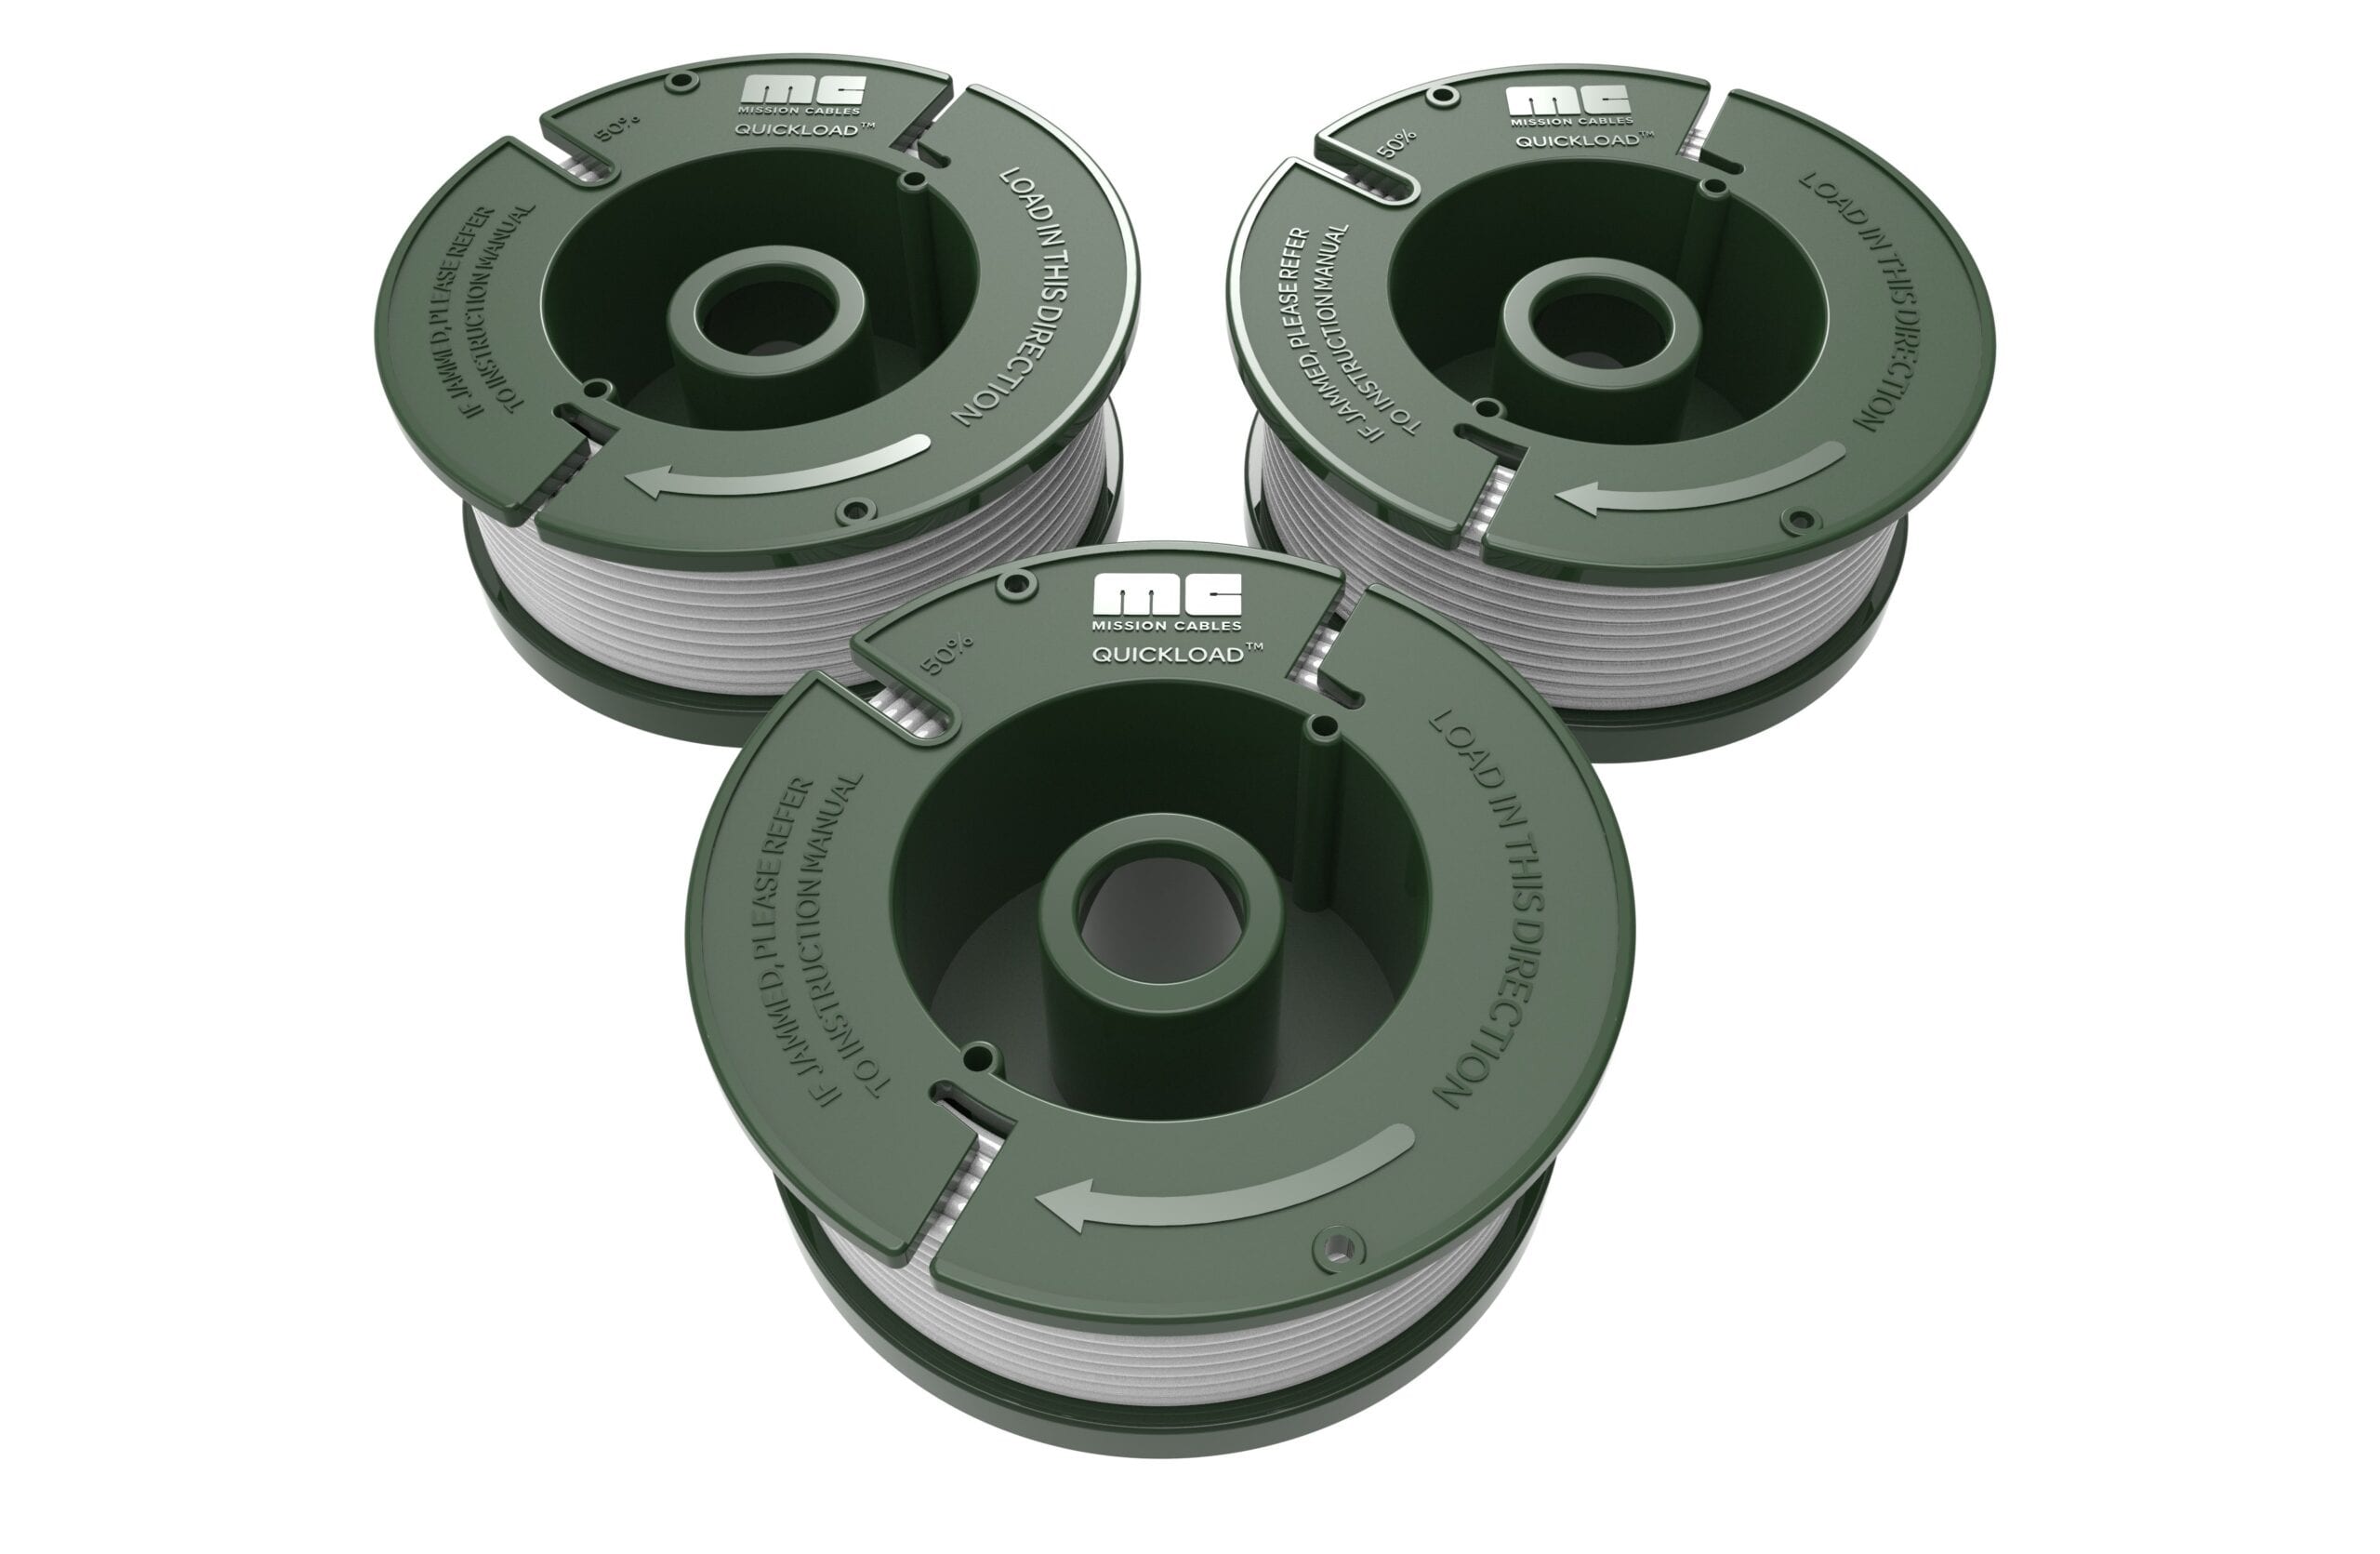 Trimmer Line Spool For Black And Decker Trimmers 